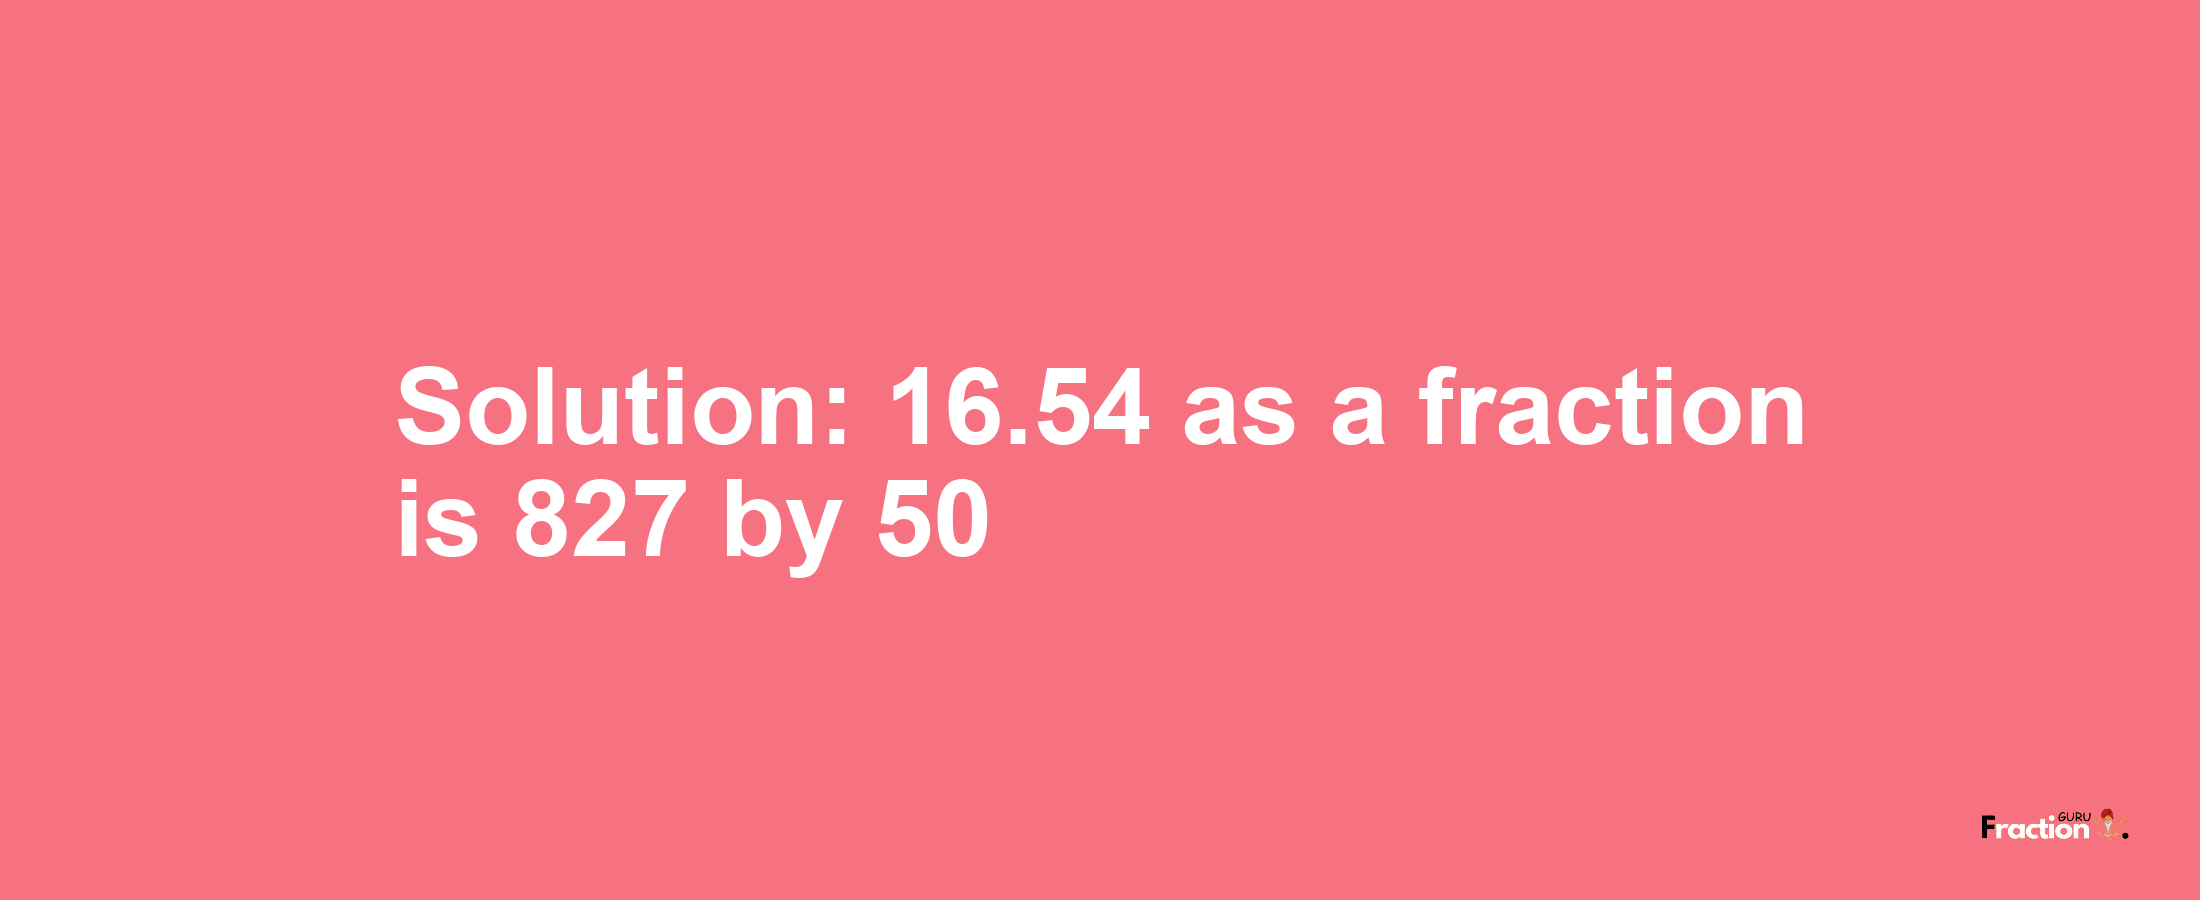 Solution:16.54 as a fraction is 827/50